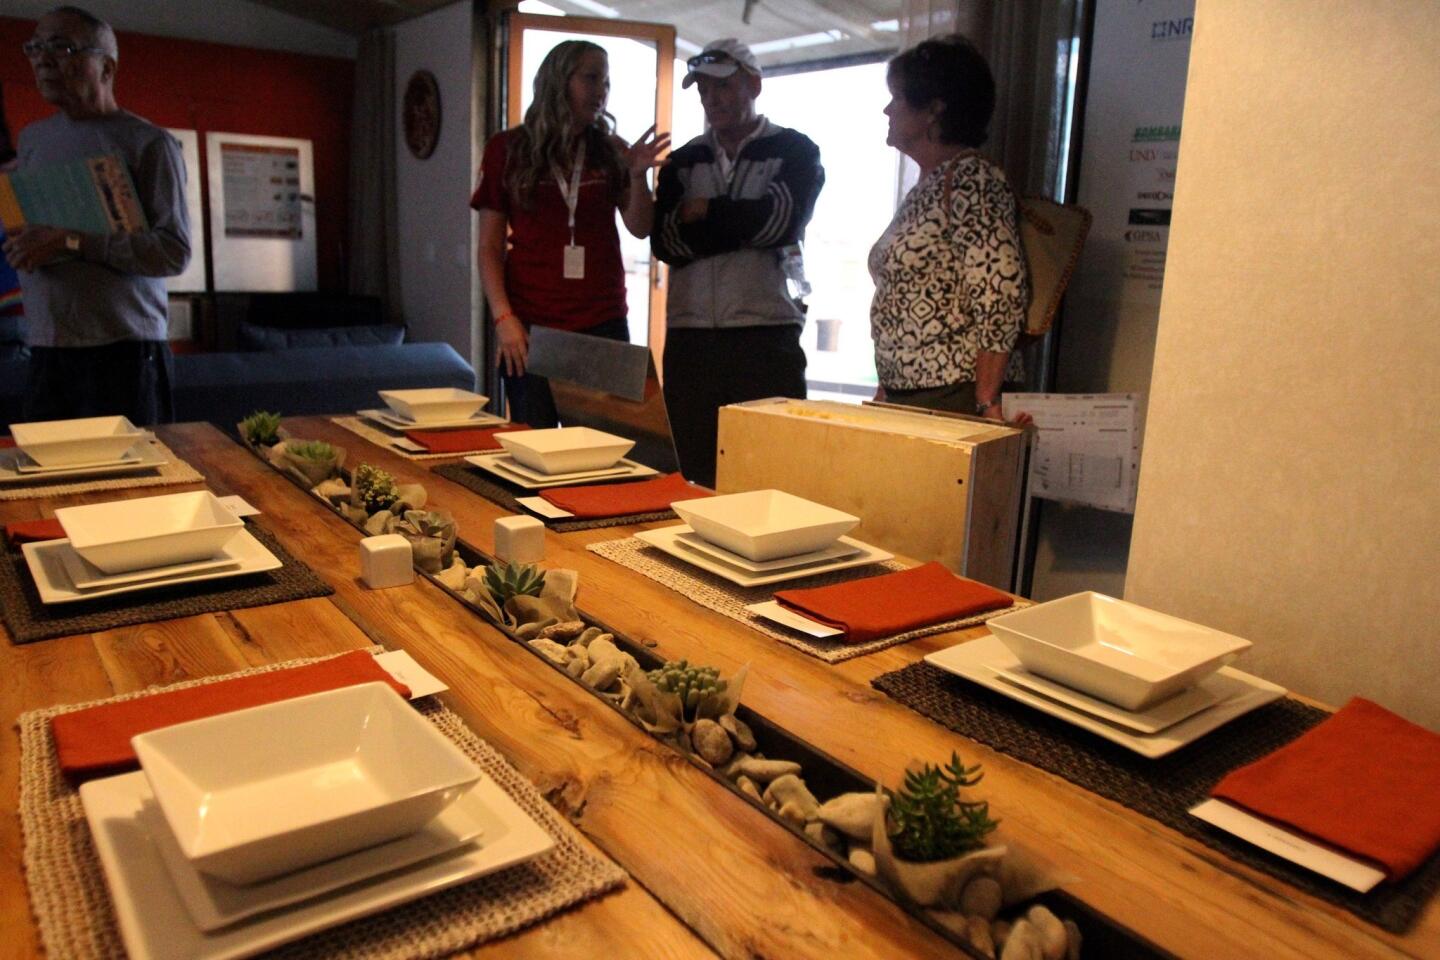 A tour during the public opening of the UNLV house pauses by the table students designed with a central trough for succulents and built using scrap materials. Final team score: 947.572. Full article on UNLV house